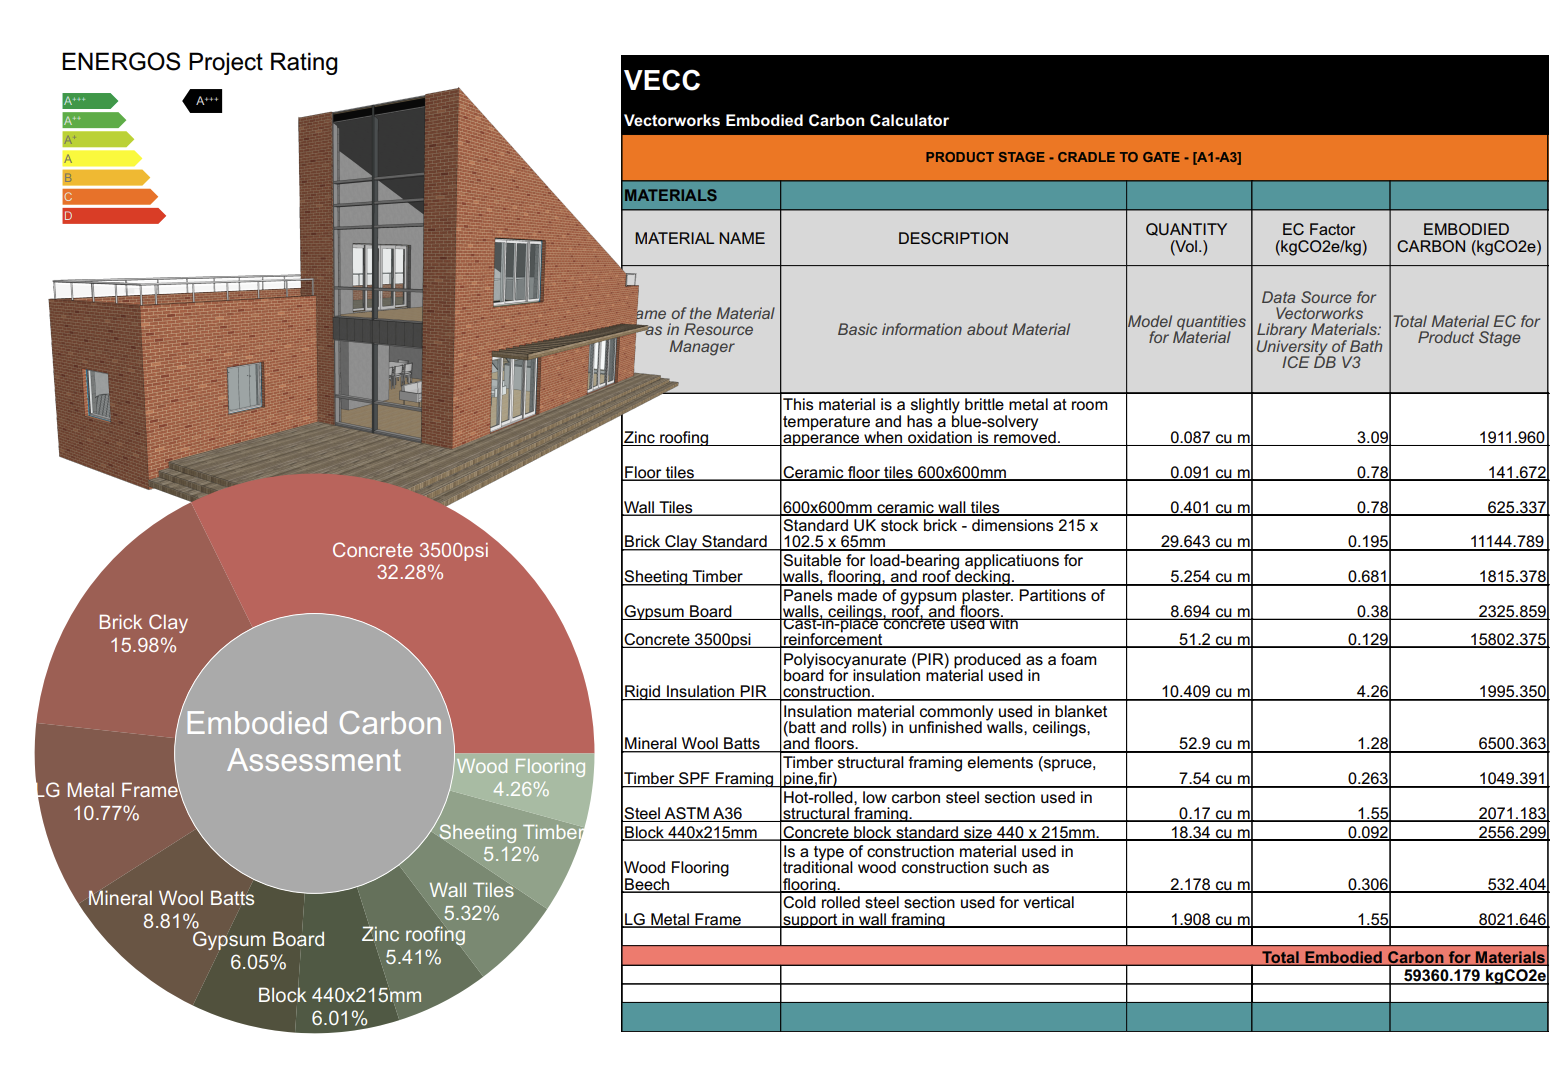 Embodied Carbon Assessments With Vectorworks Embodied Carbon Calculator | Irish Building Magazine.ie